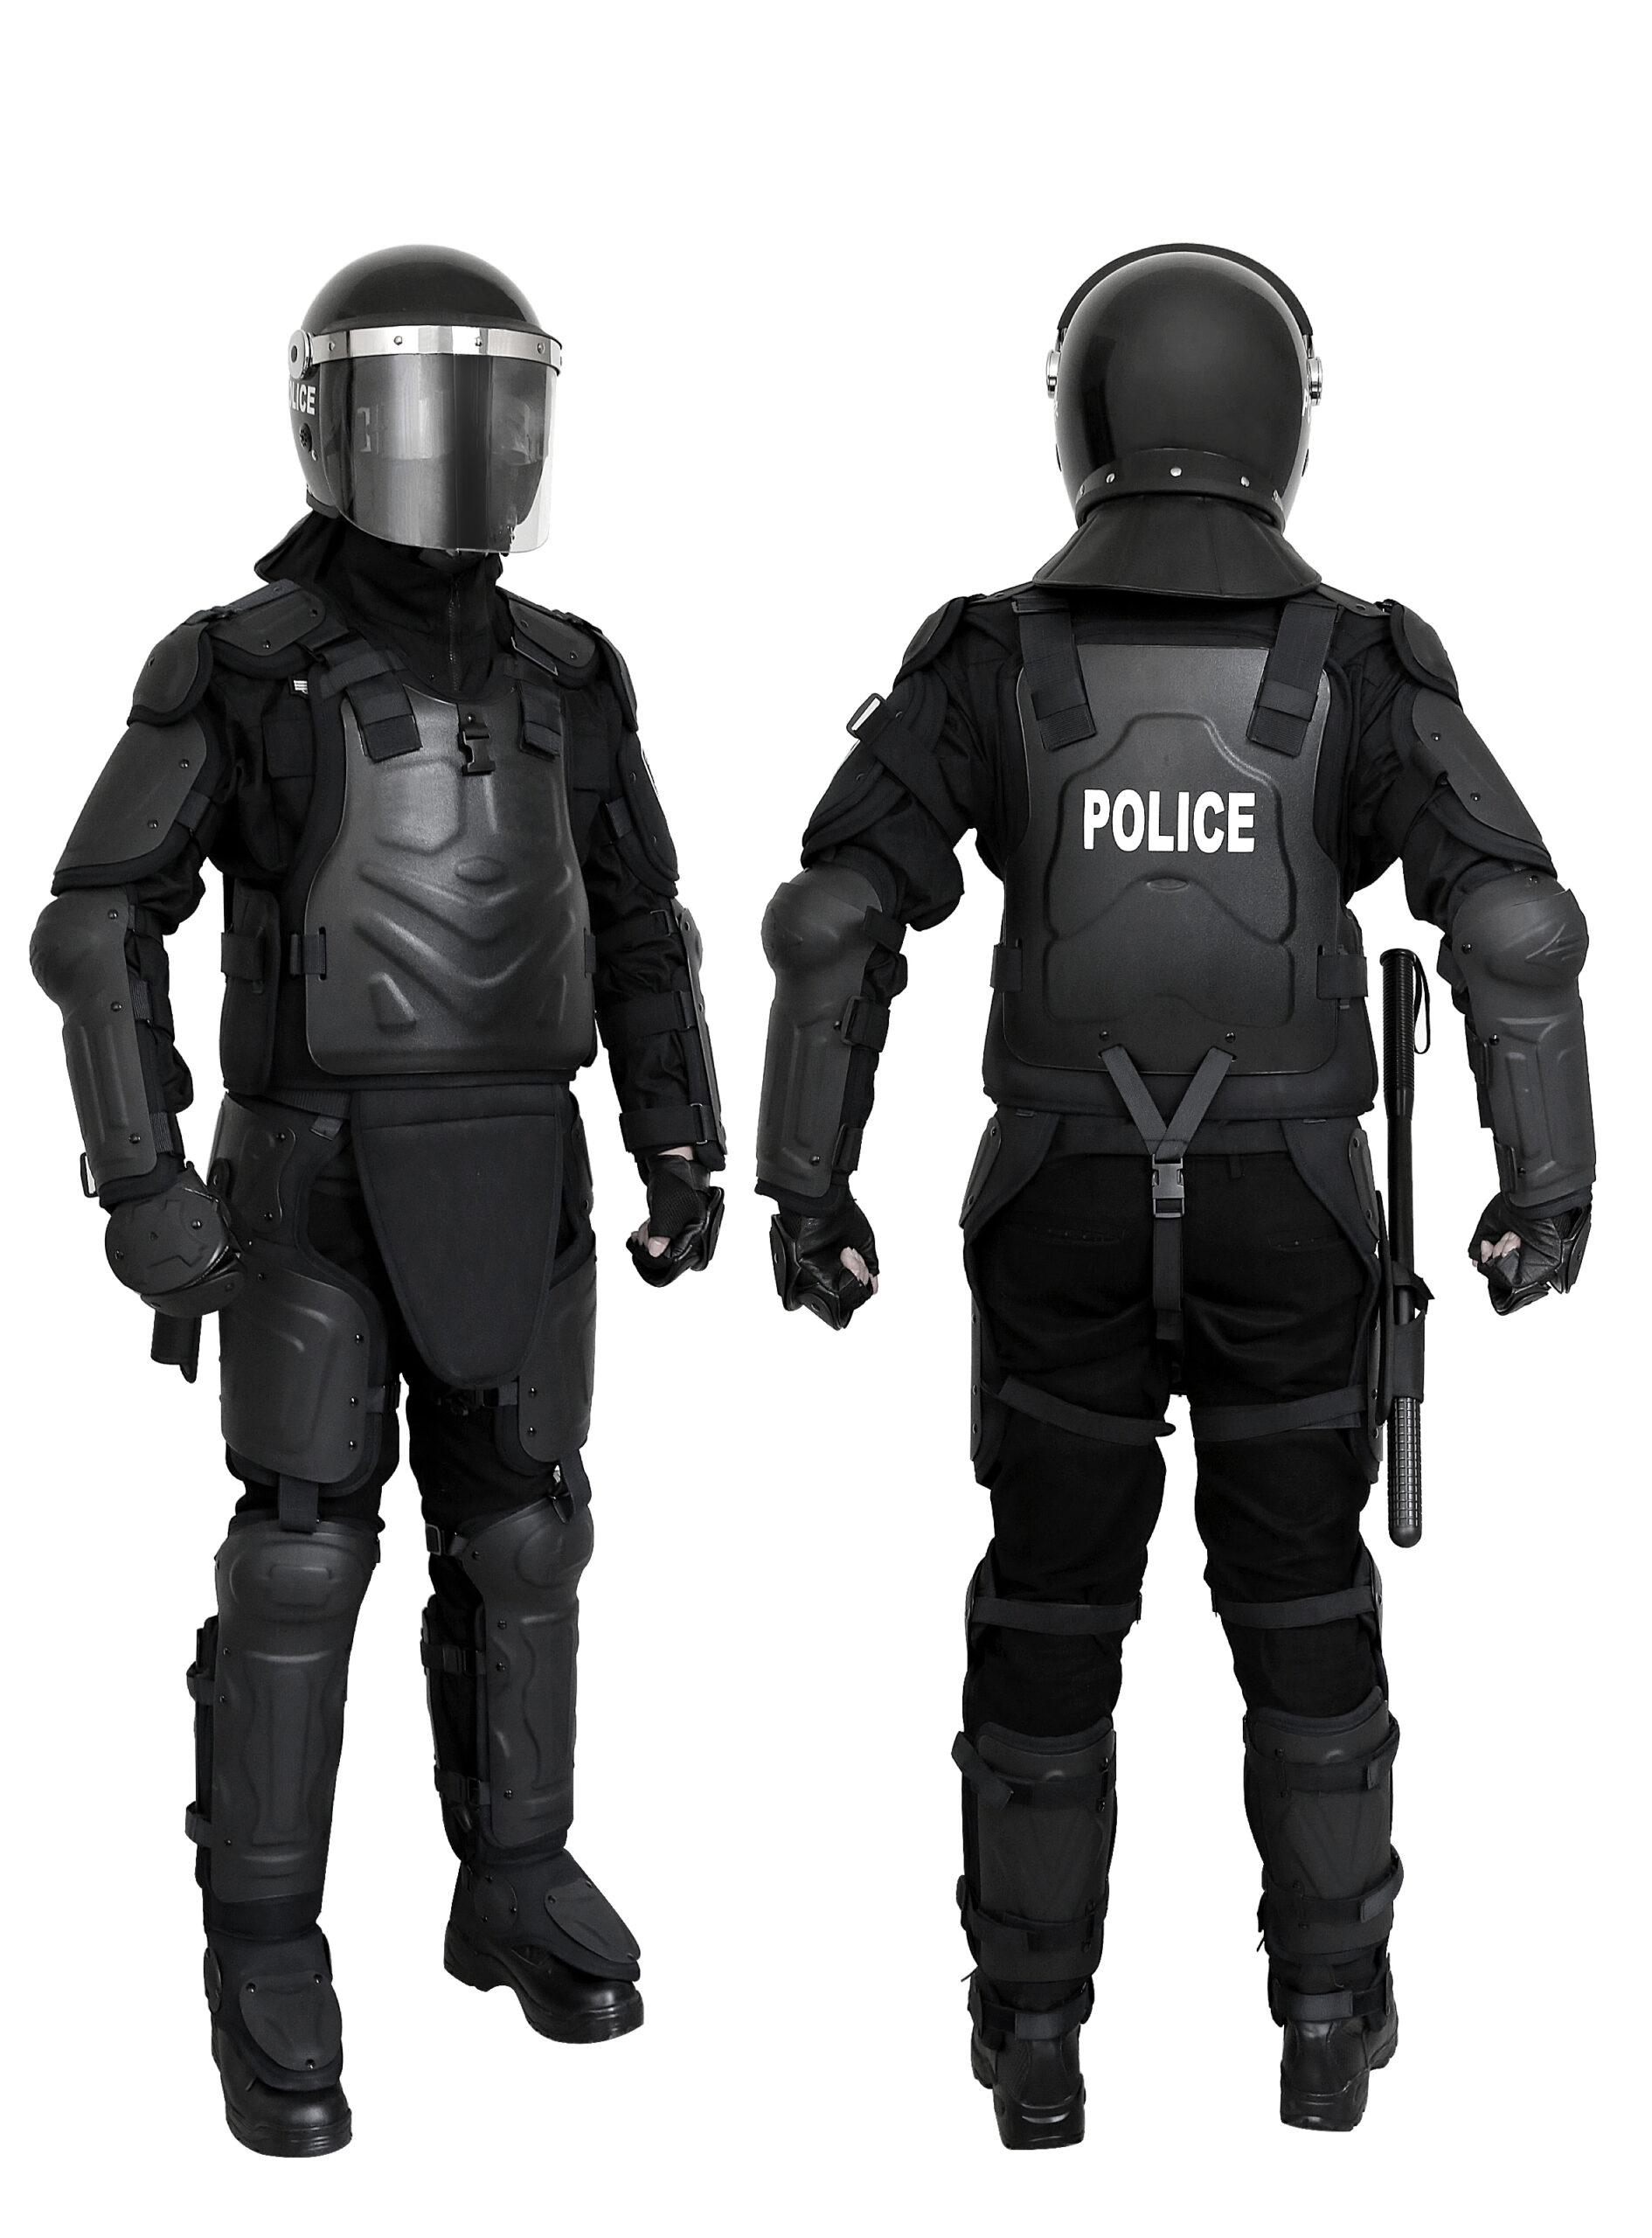 TURBO-X Riot Suit – 1 Size Fits All